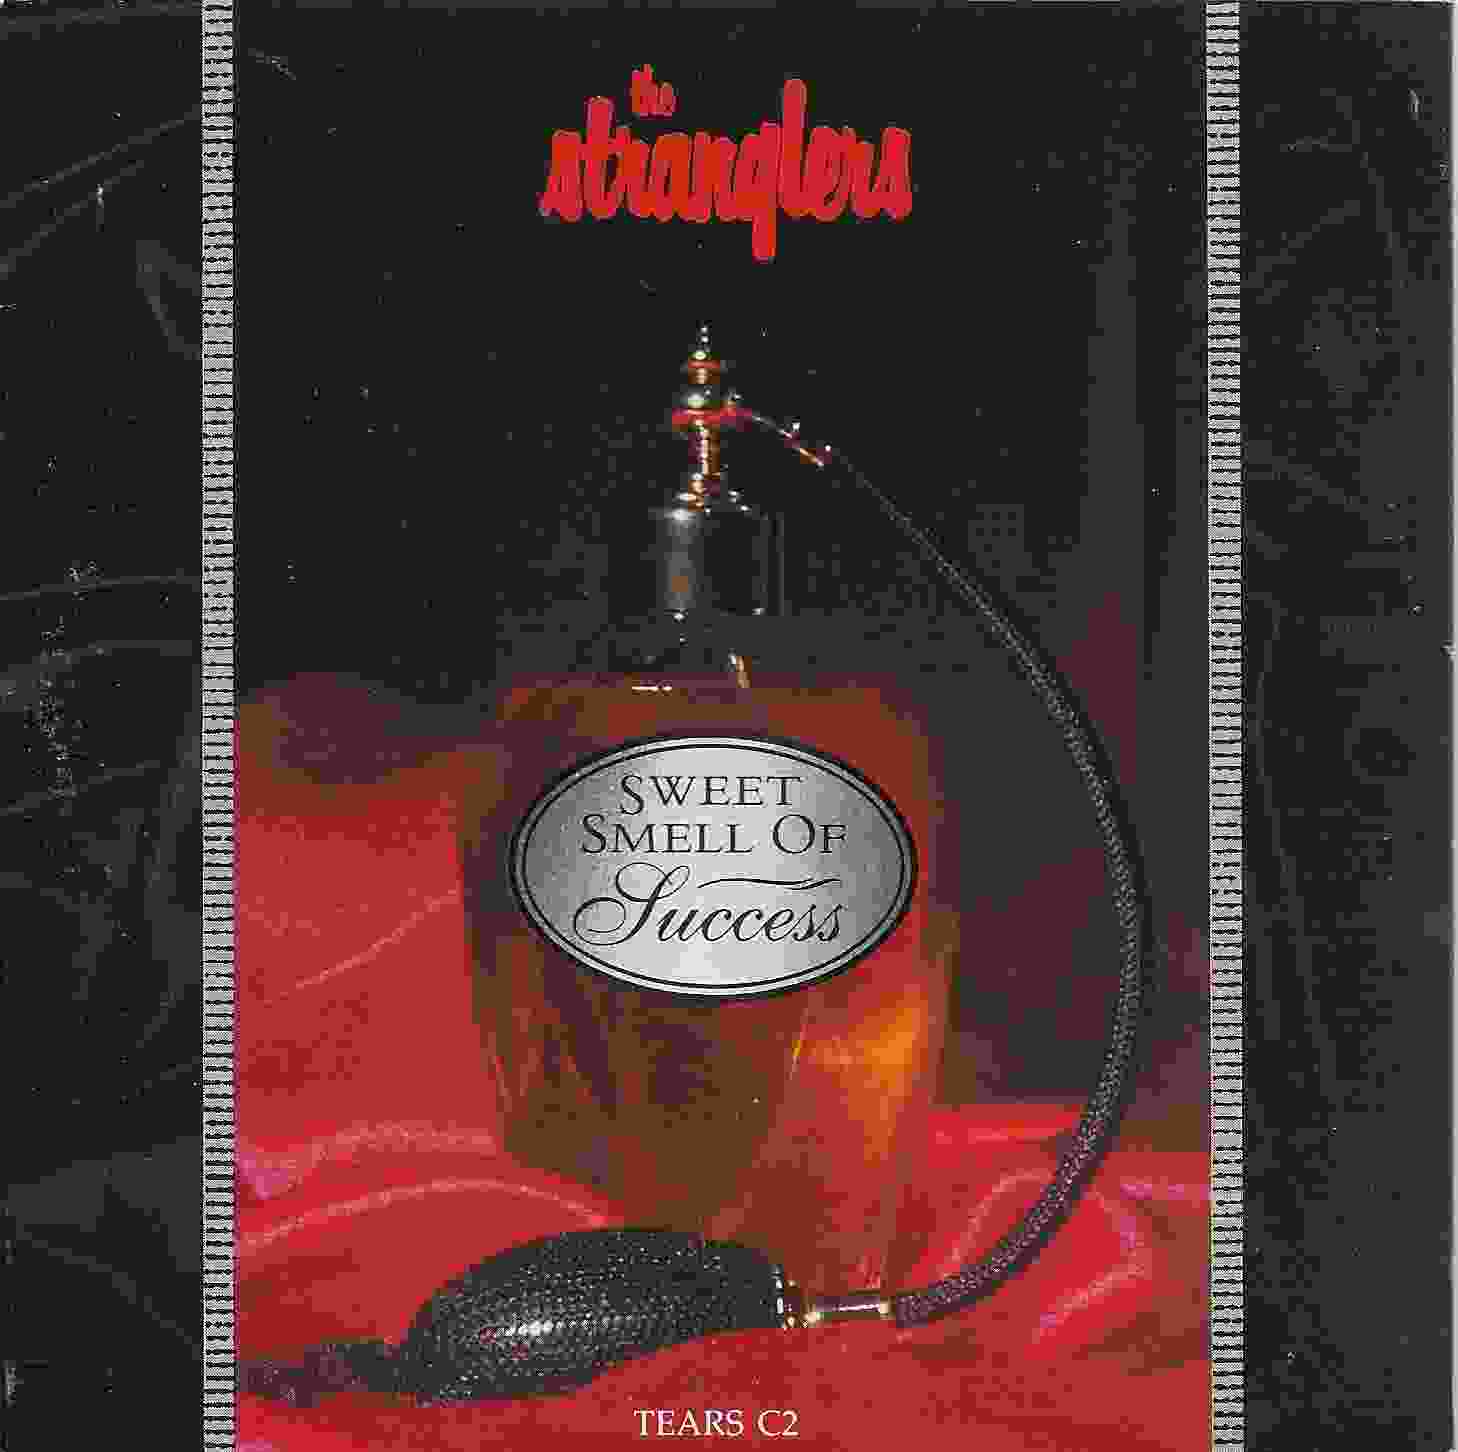 Picture of TEARS C 2 Sweet smell of success by artist The Stranglers from The Stranglers cdsingles